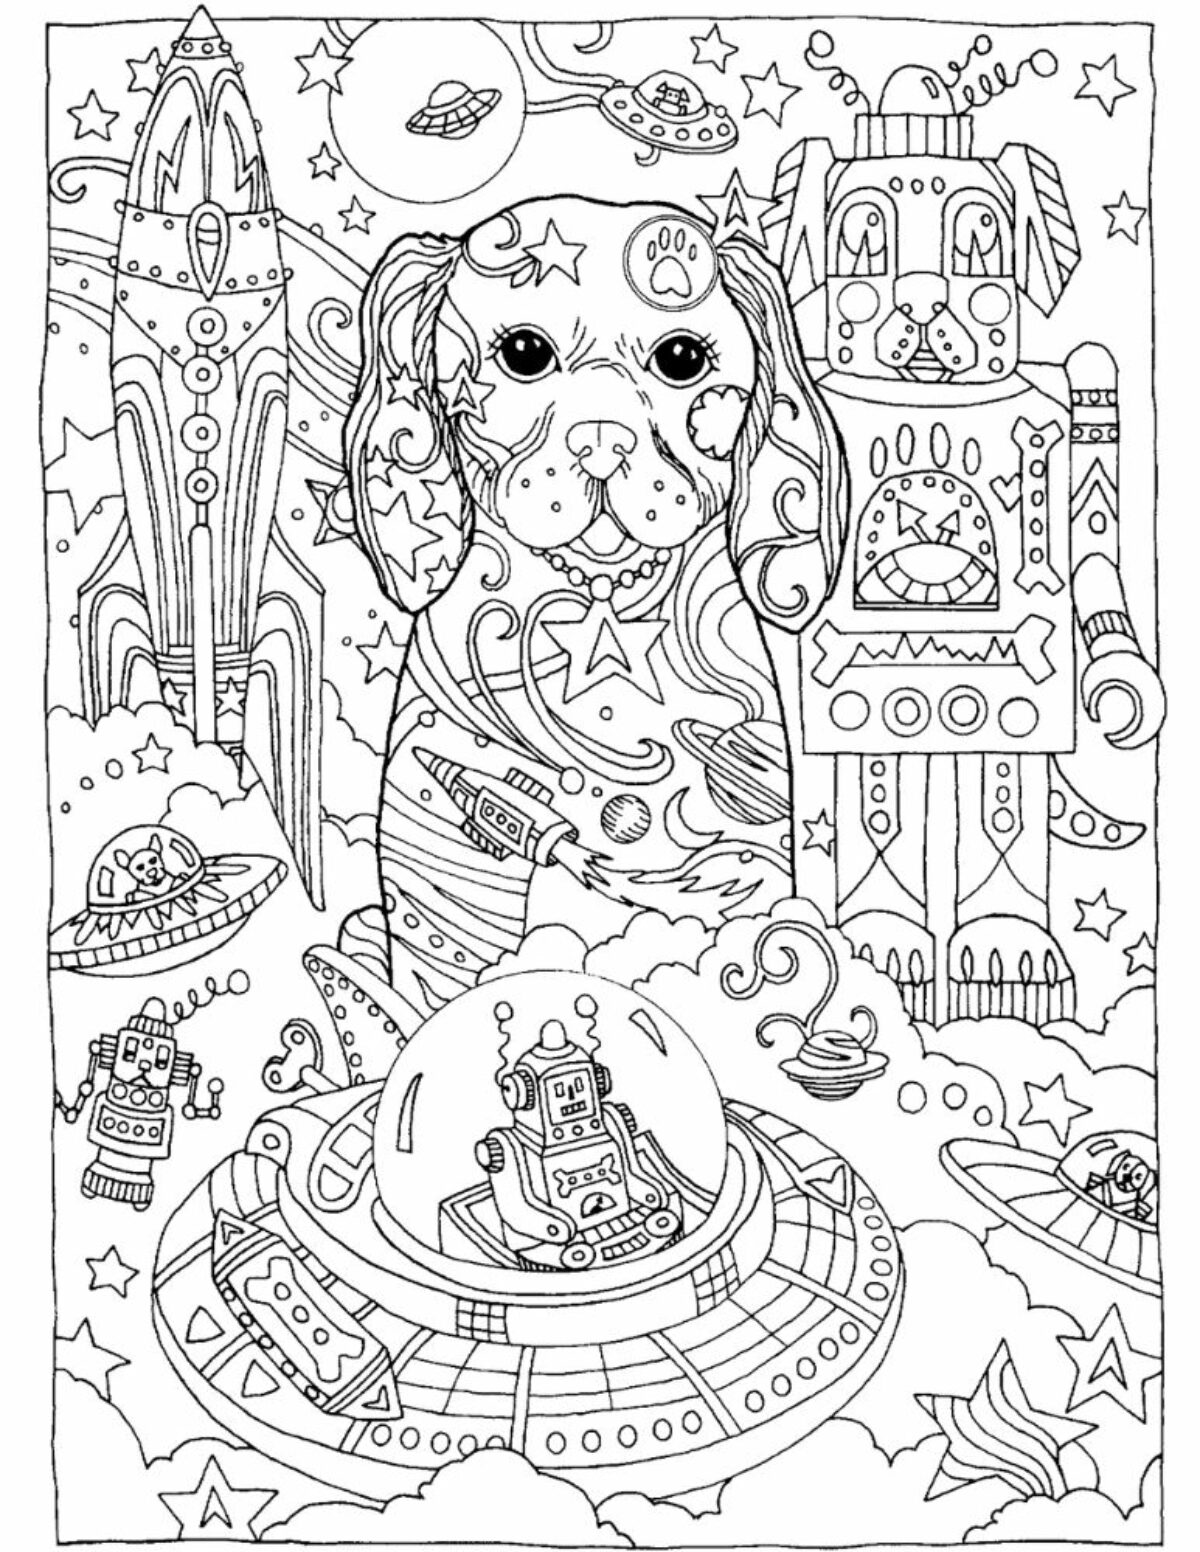 robot dog coloring pages